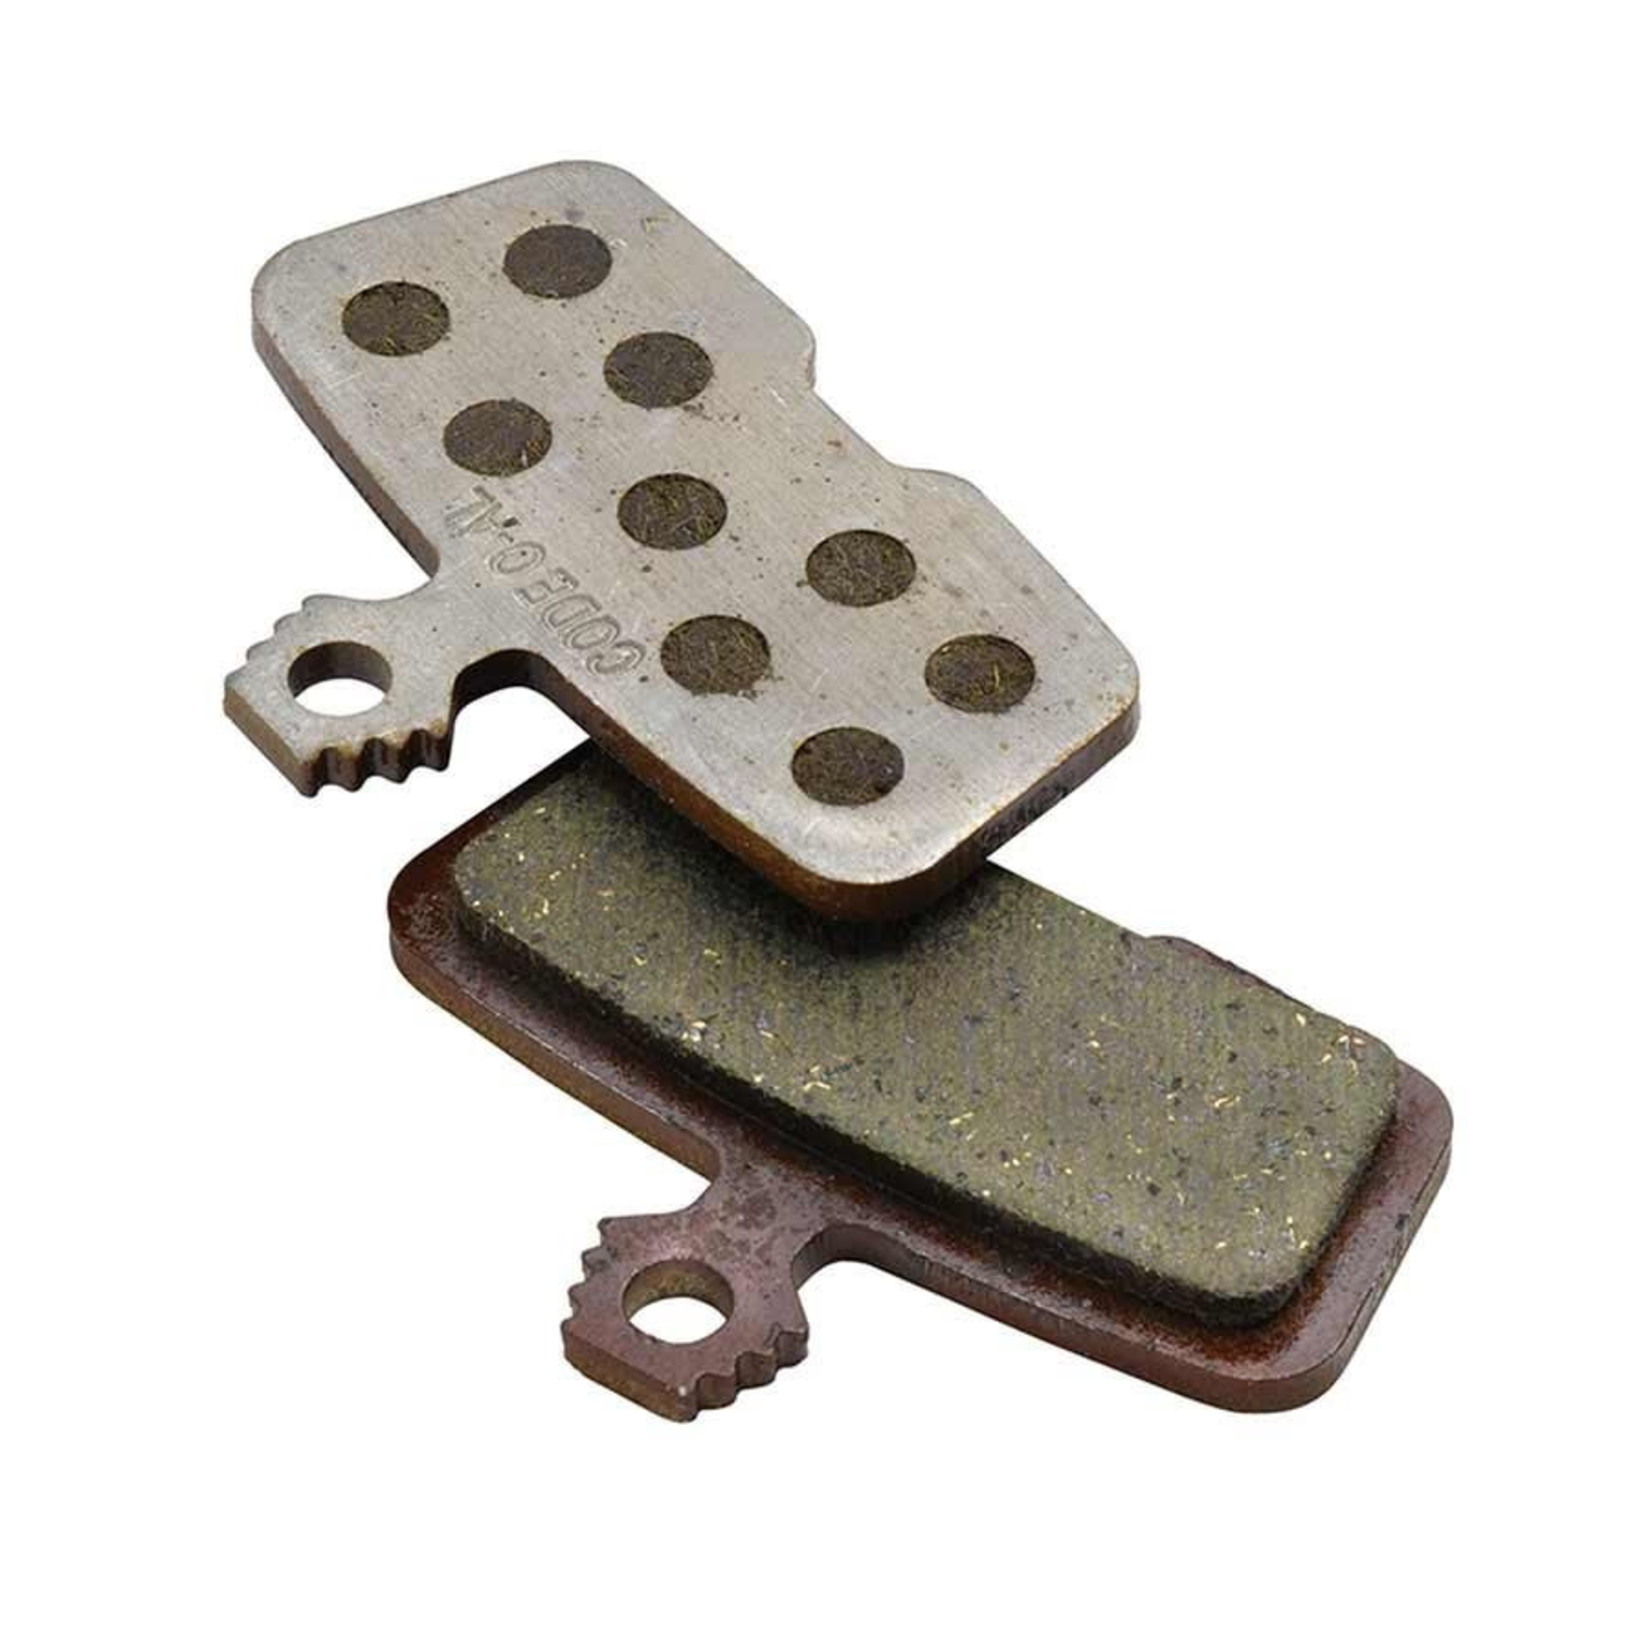 SRAM SRAM Disc Brake Pads Organic Compound Steel Backed Quiet For Code/Code R/Code RSC/Guide RE